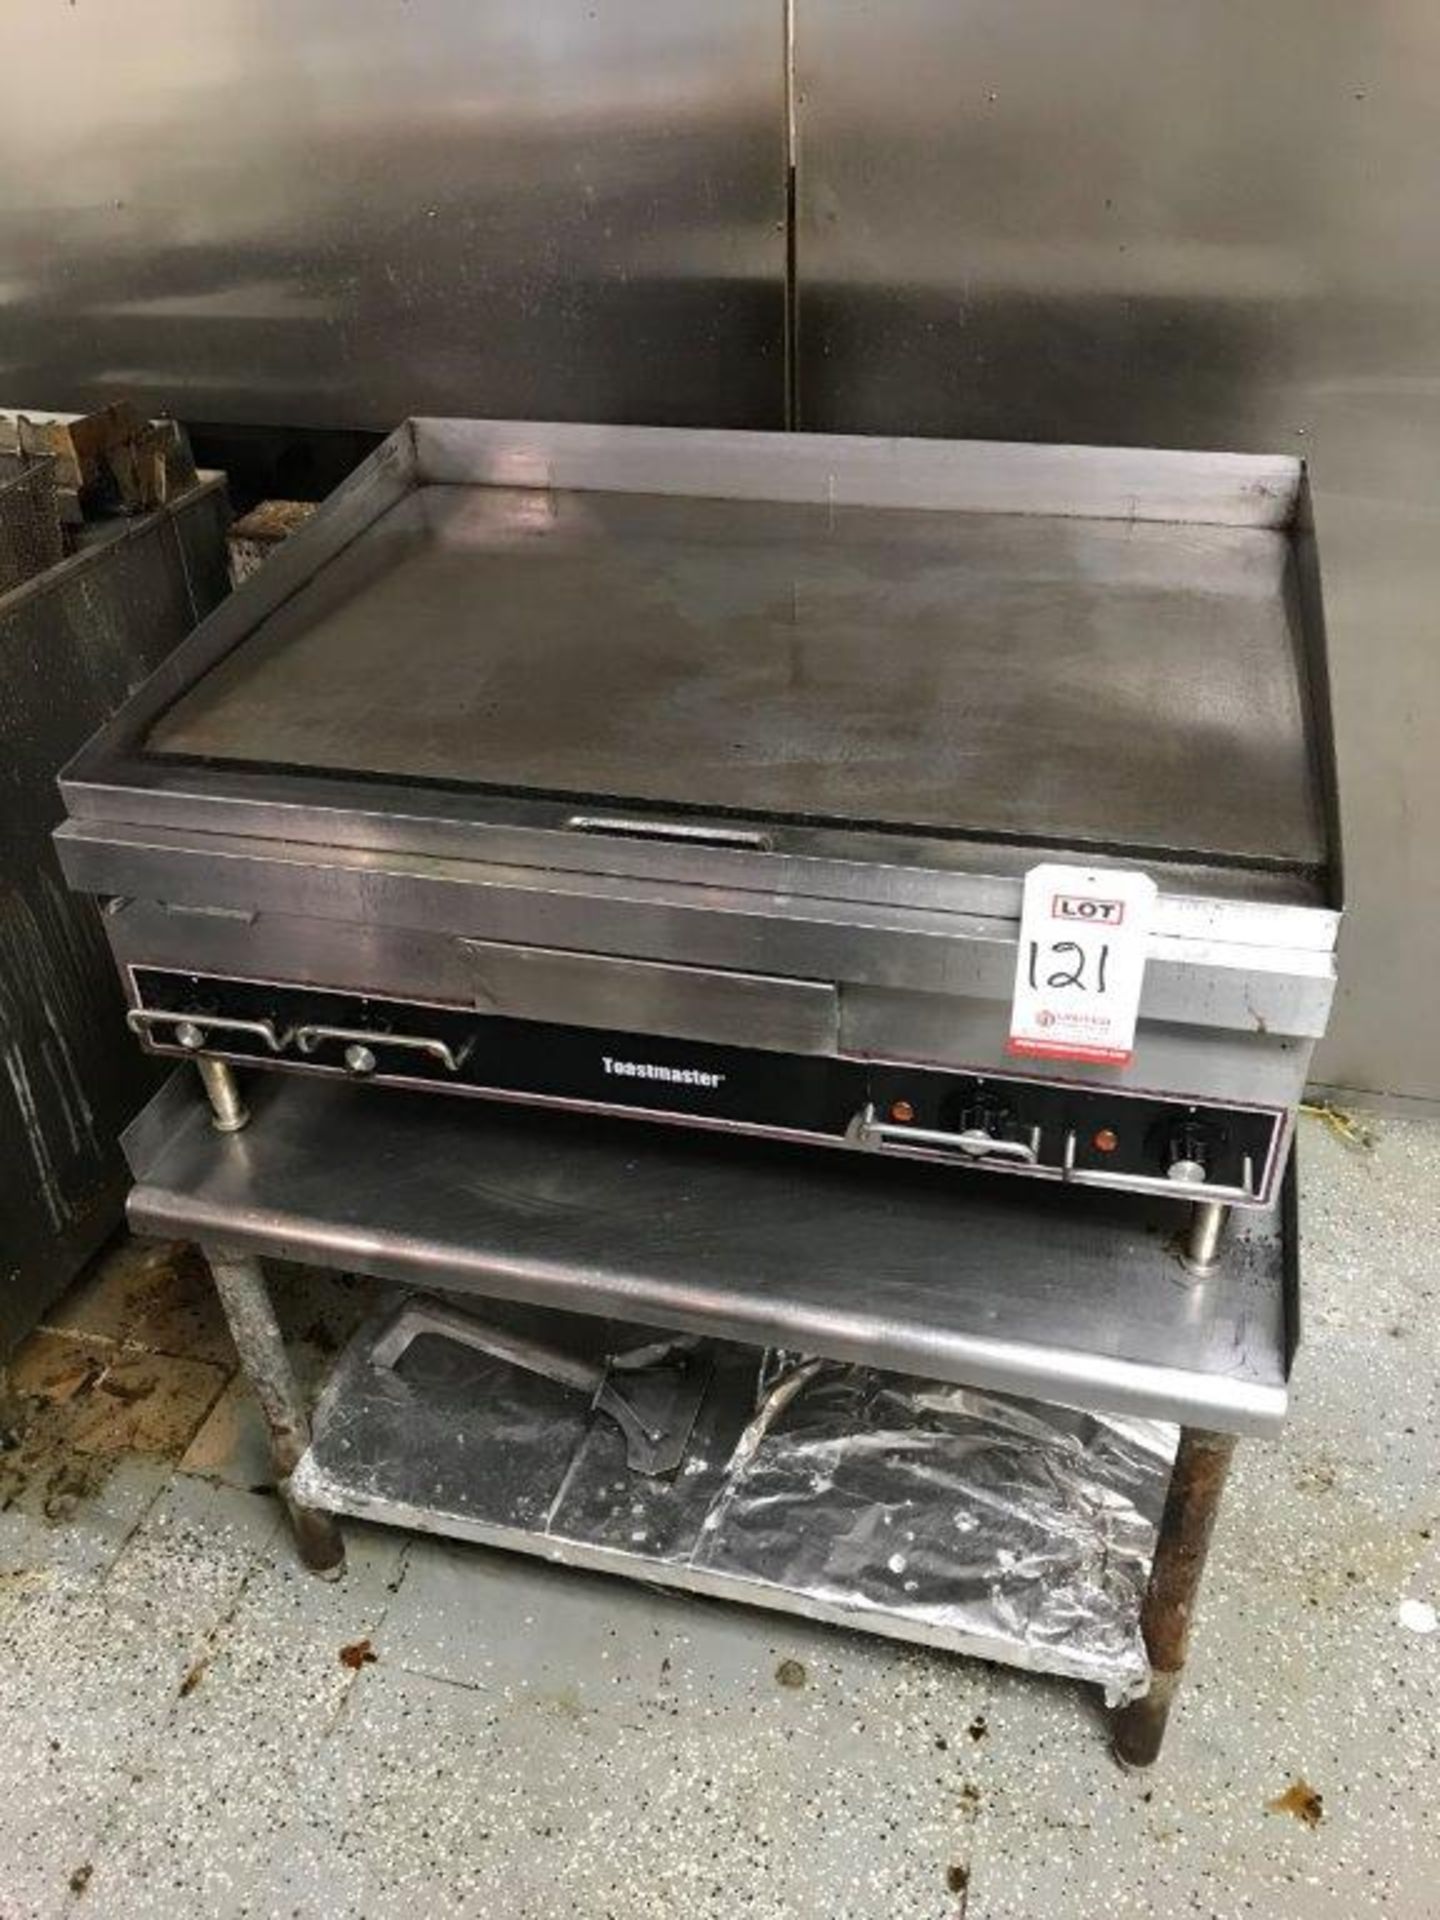 TOASTMASTER GRIDDLE, 24" X 36", 4 TEMPERATURE CONTROLS